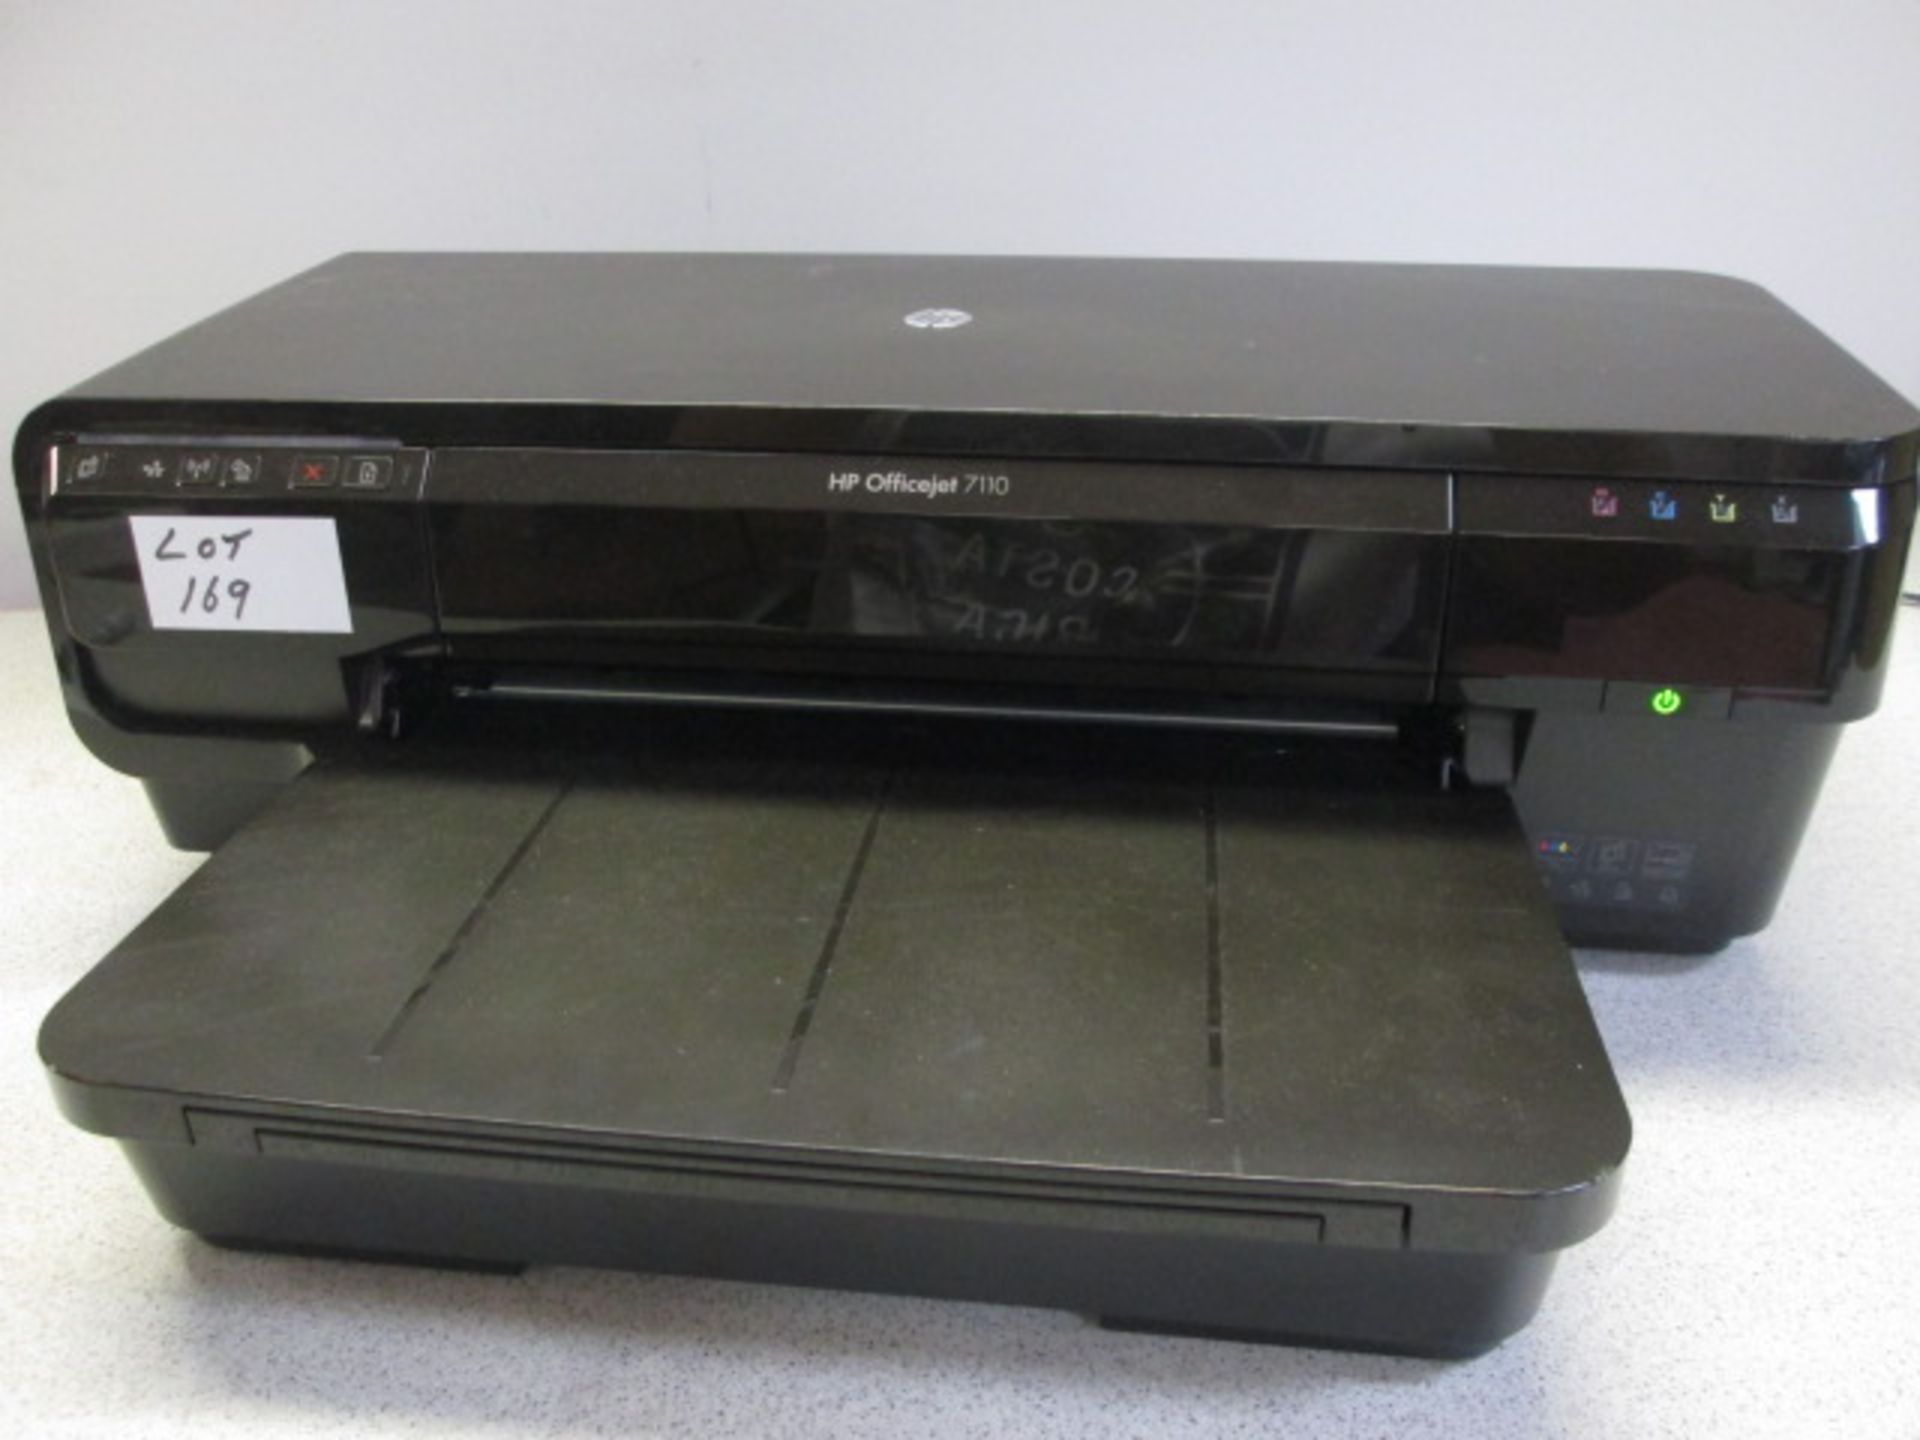 HP Officejet 7110 Colour Printer. Comes with Power Supply